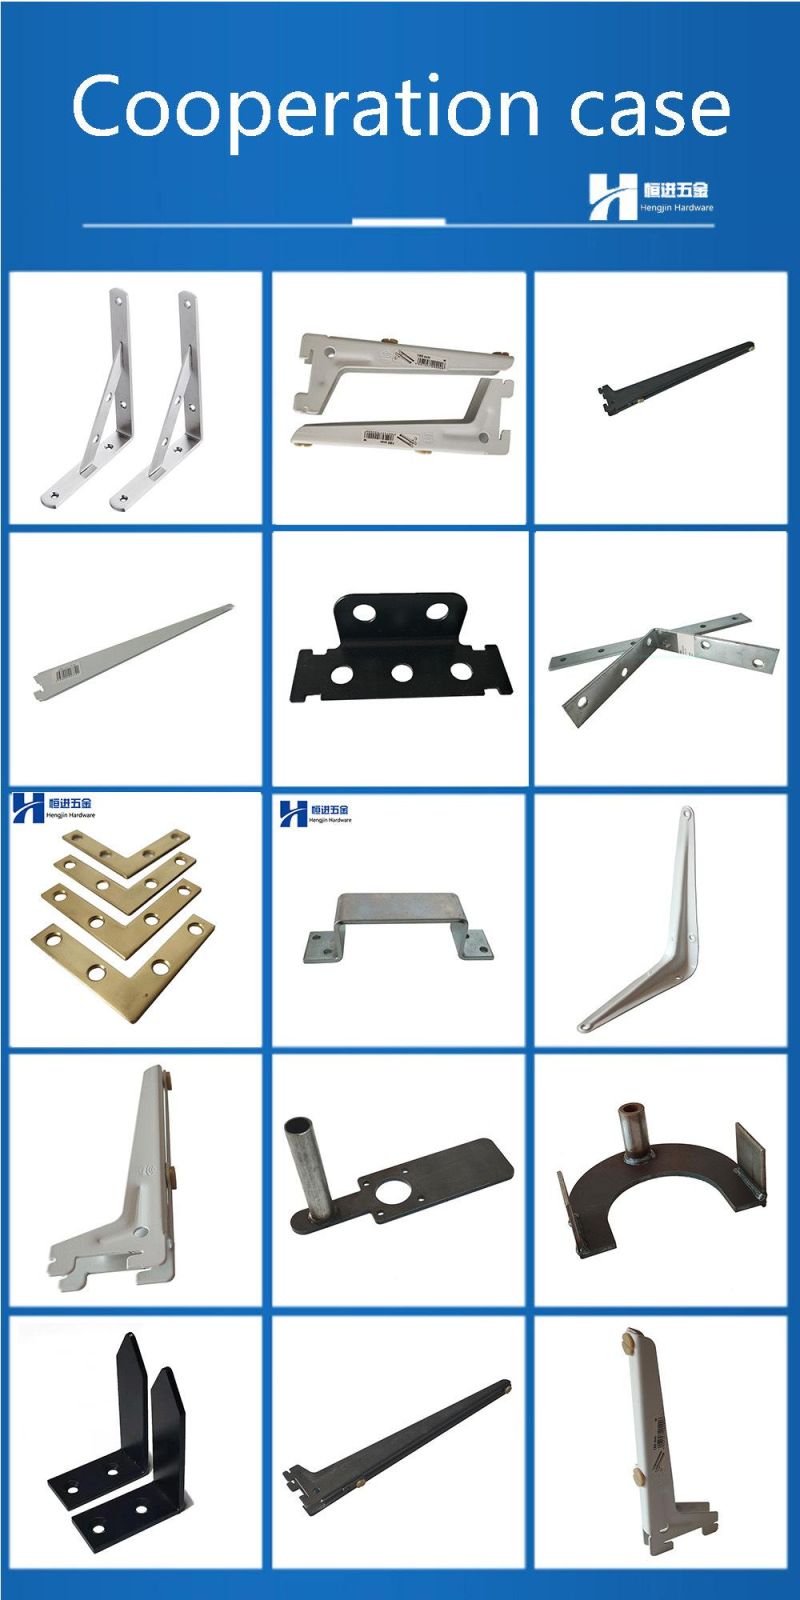 OEM The High Quality Auto Bracket Hardware Metal Stamping Parts